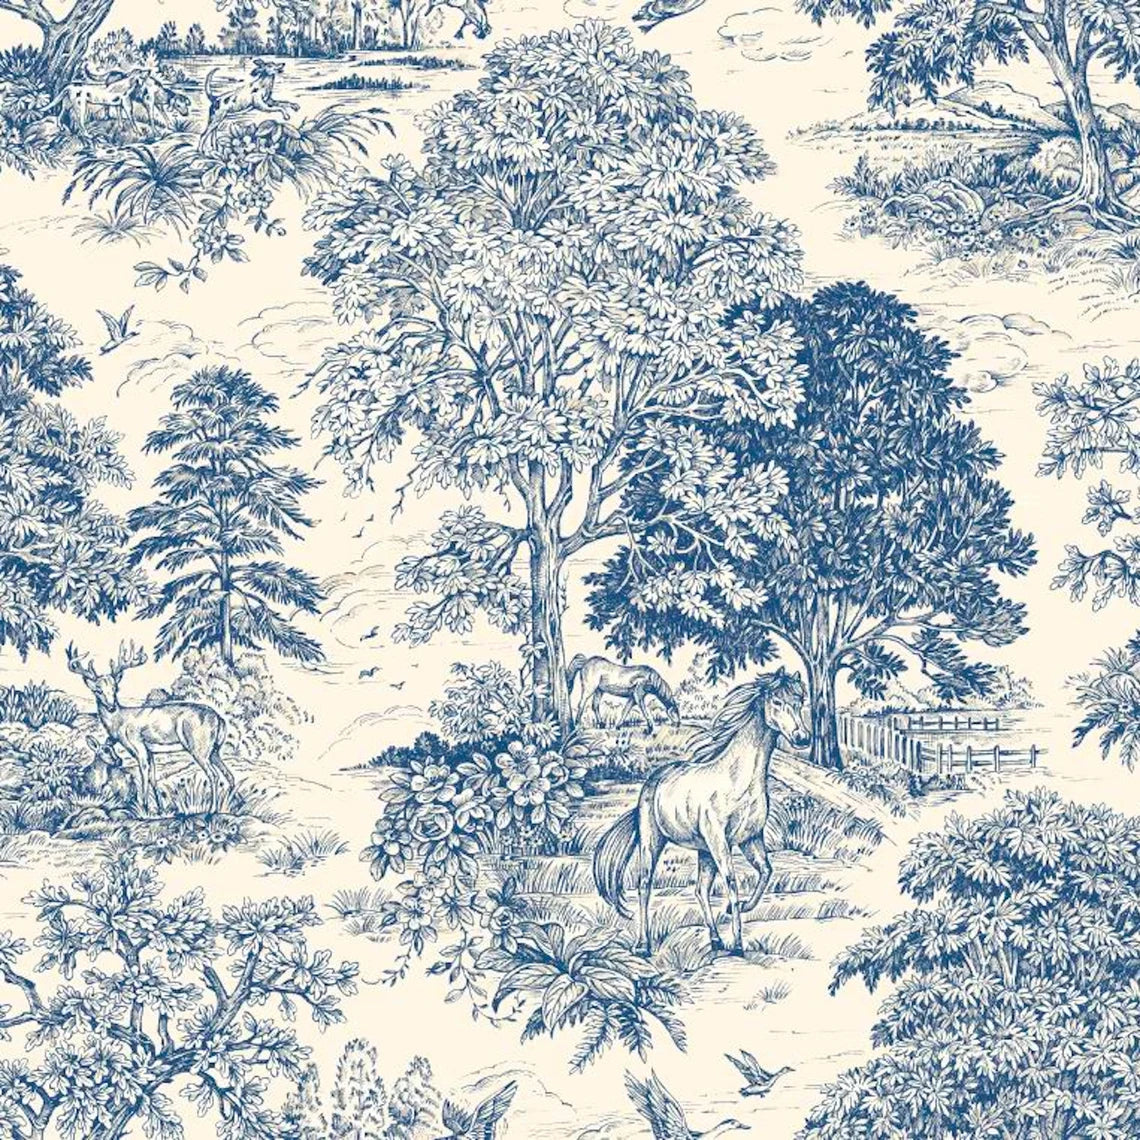 tie-up valance in Yellowstone Bluebell Blue Country Toile- Horses, Deer, Dogs- Large Scale